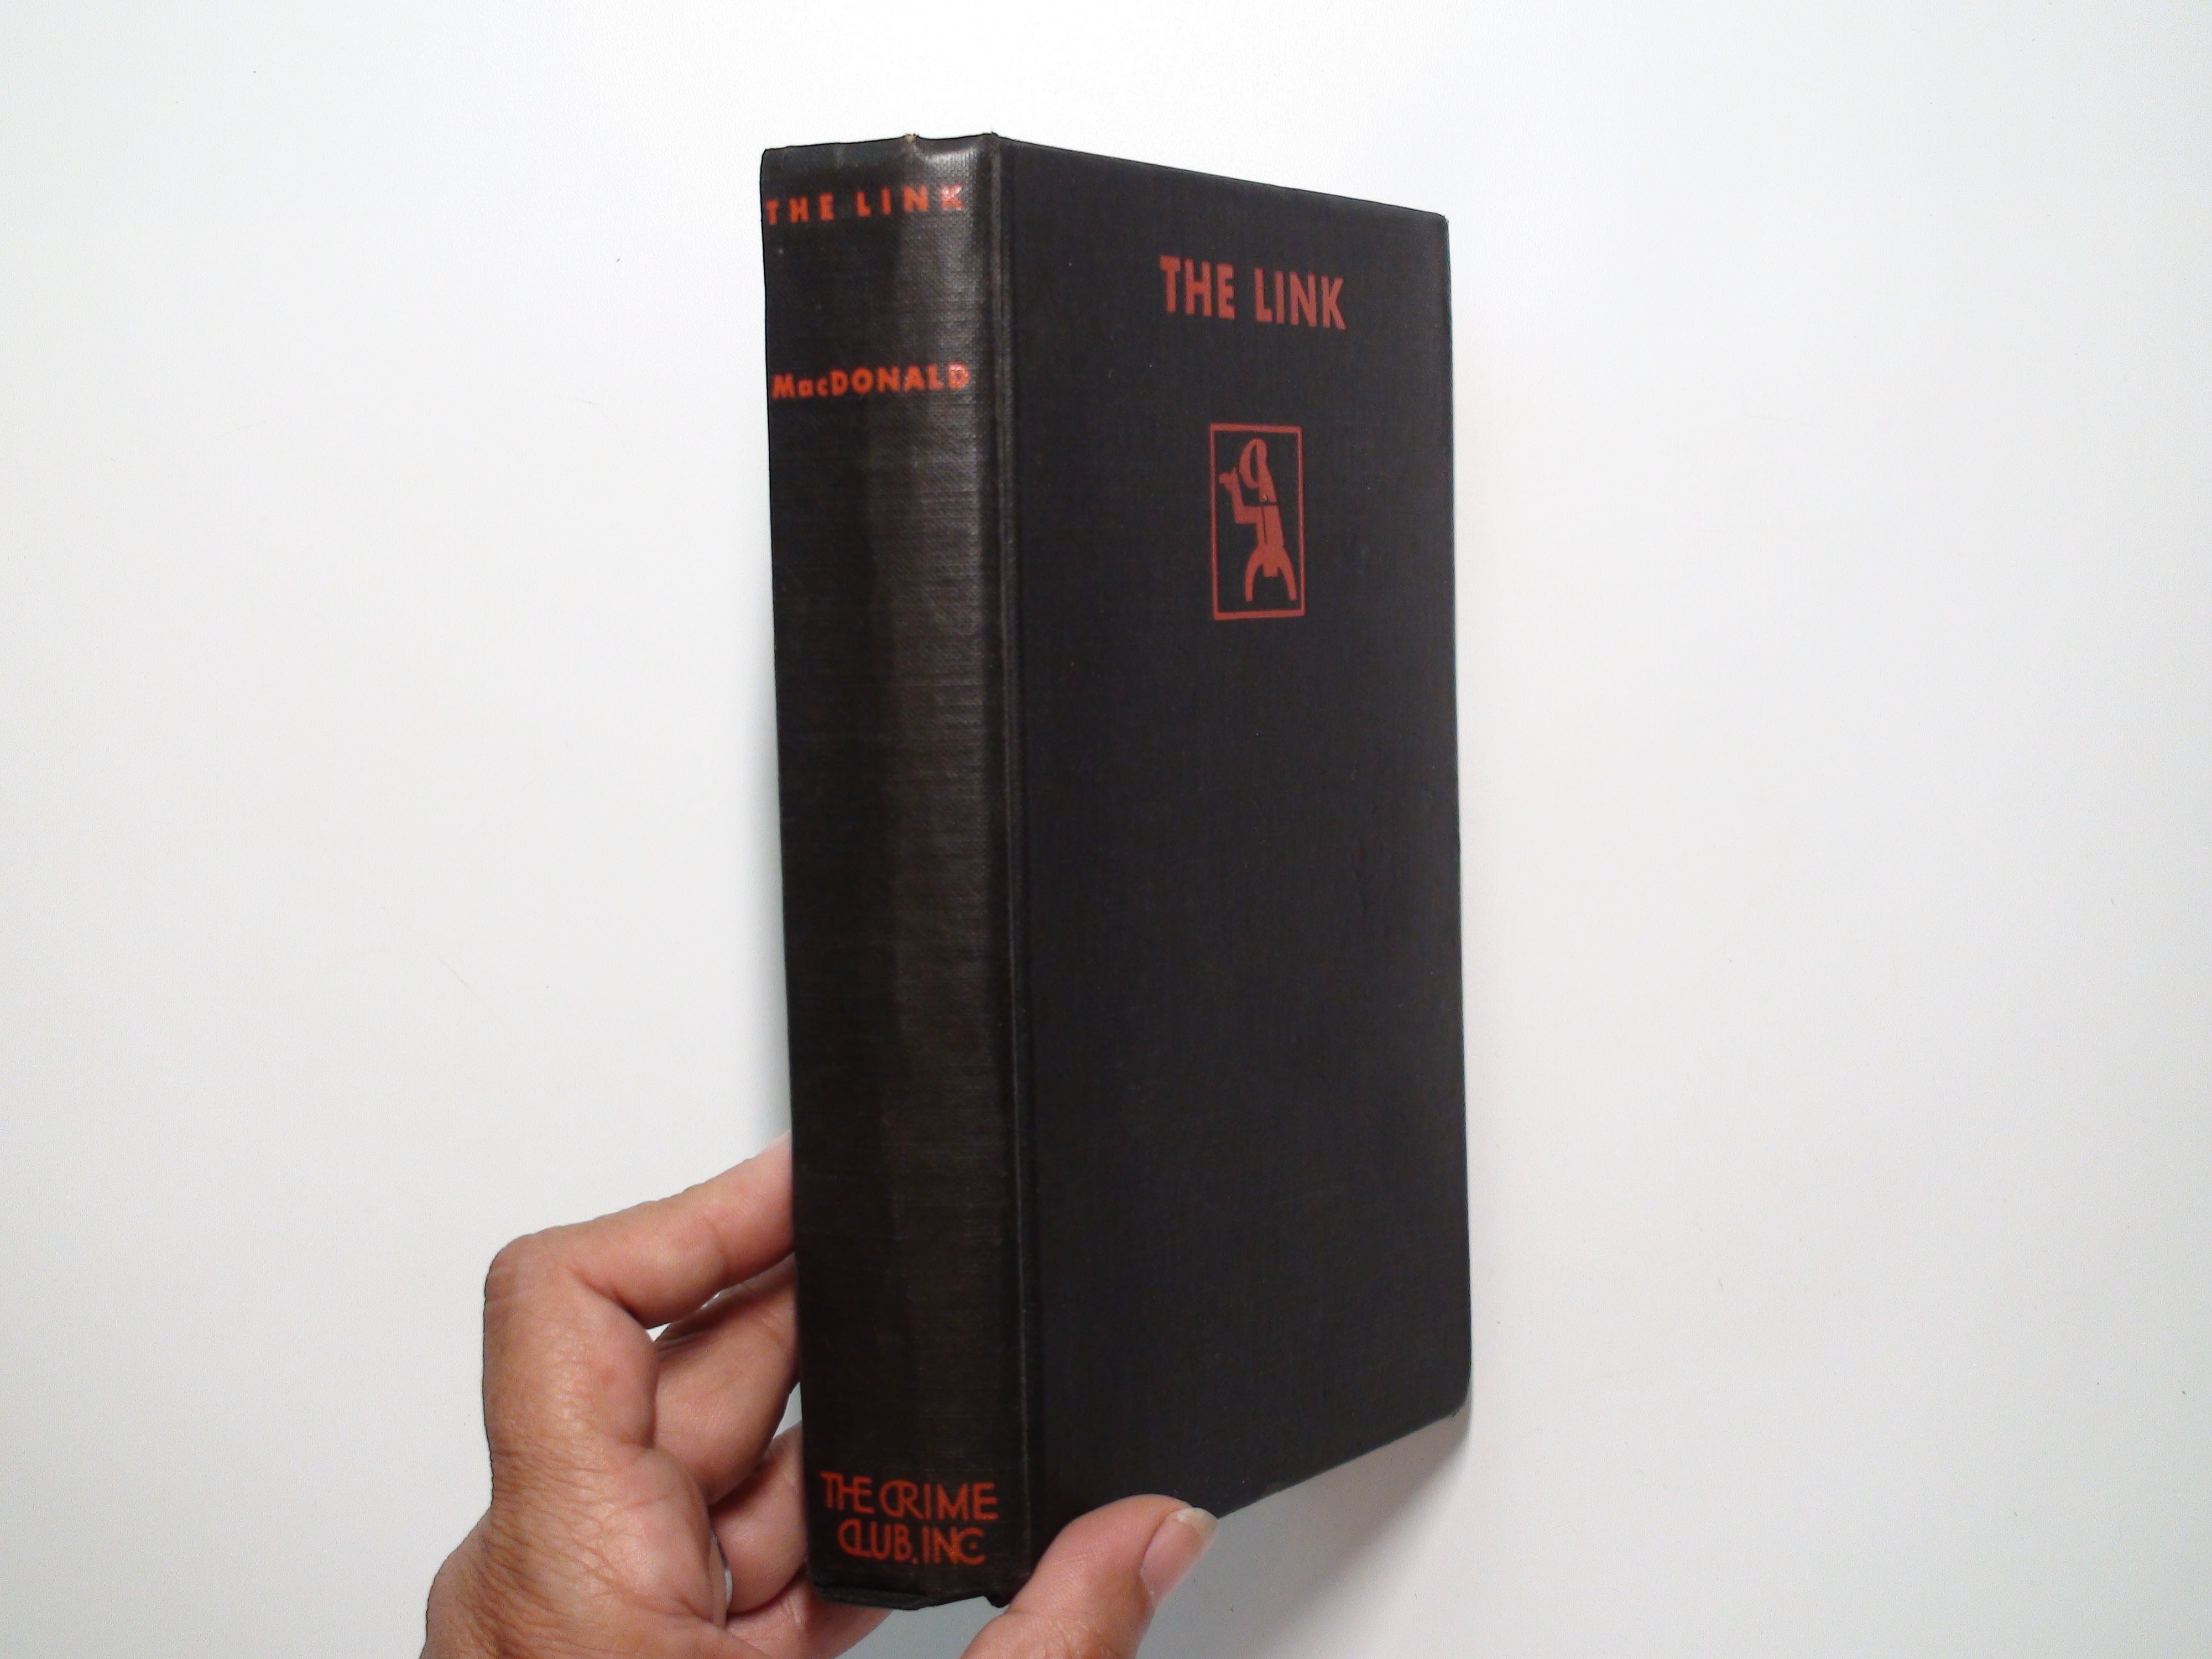 The Link by Philip MacDonald, 1st Ed, Doubleday Crime Club, 1930